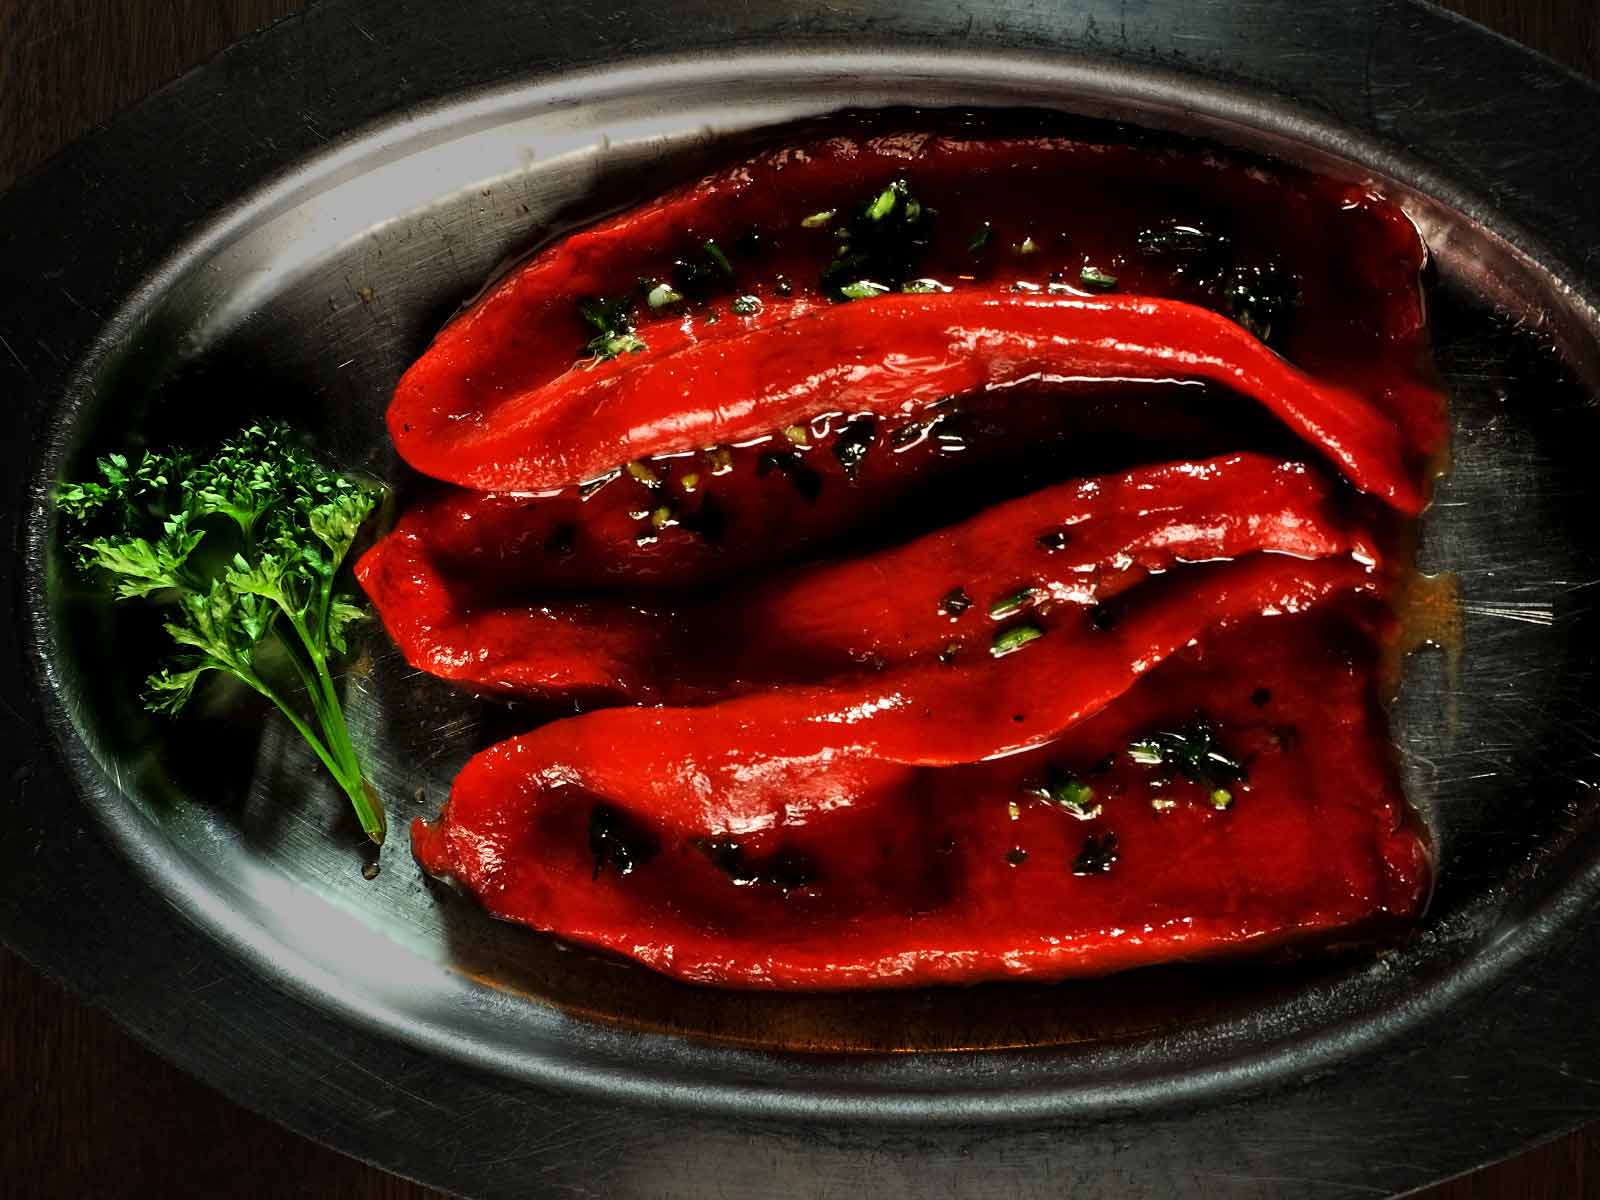 Grilled red peppers | La Cabaña Argentina